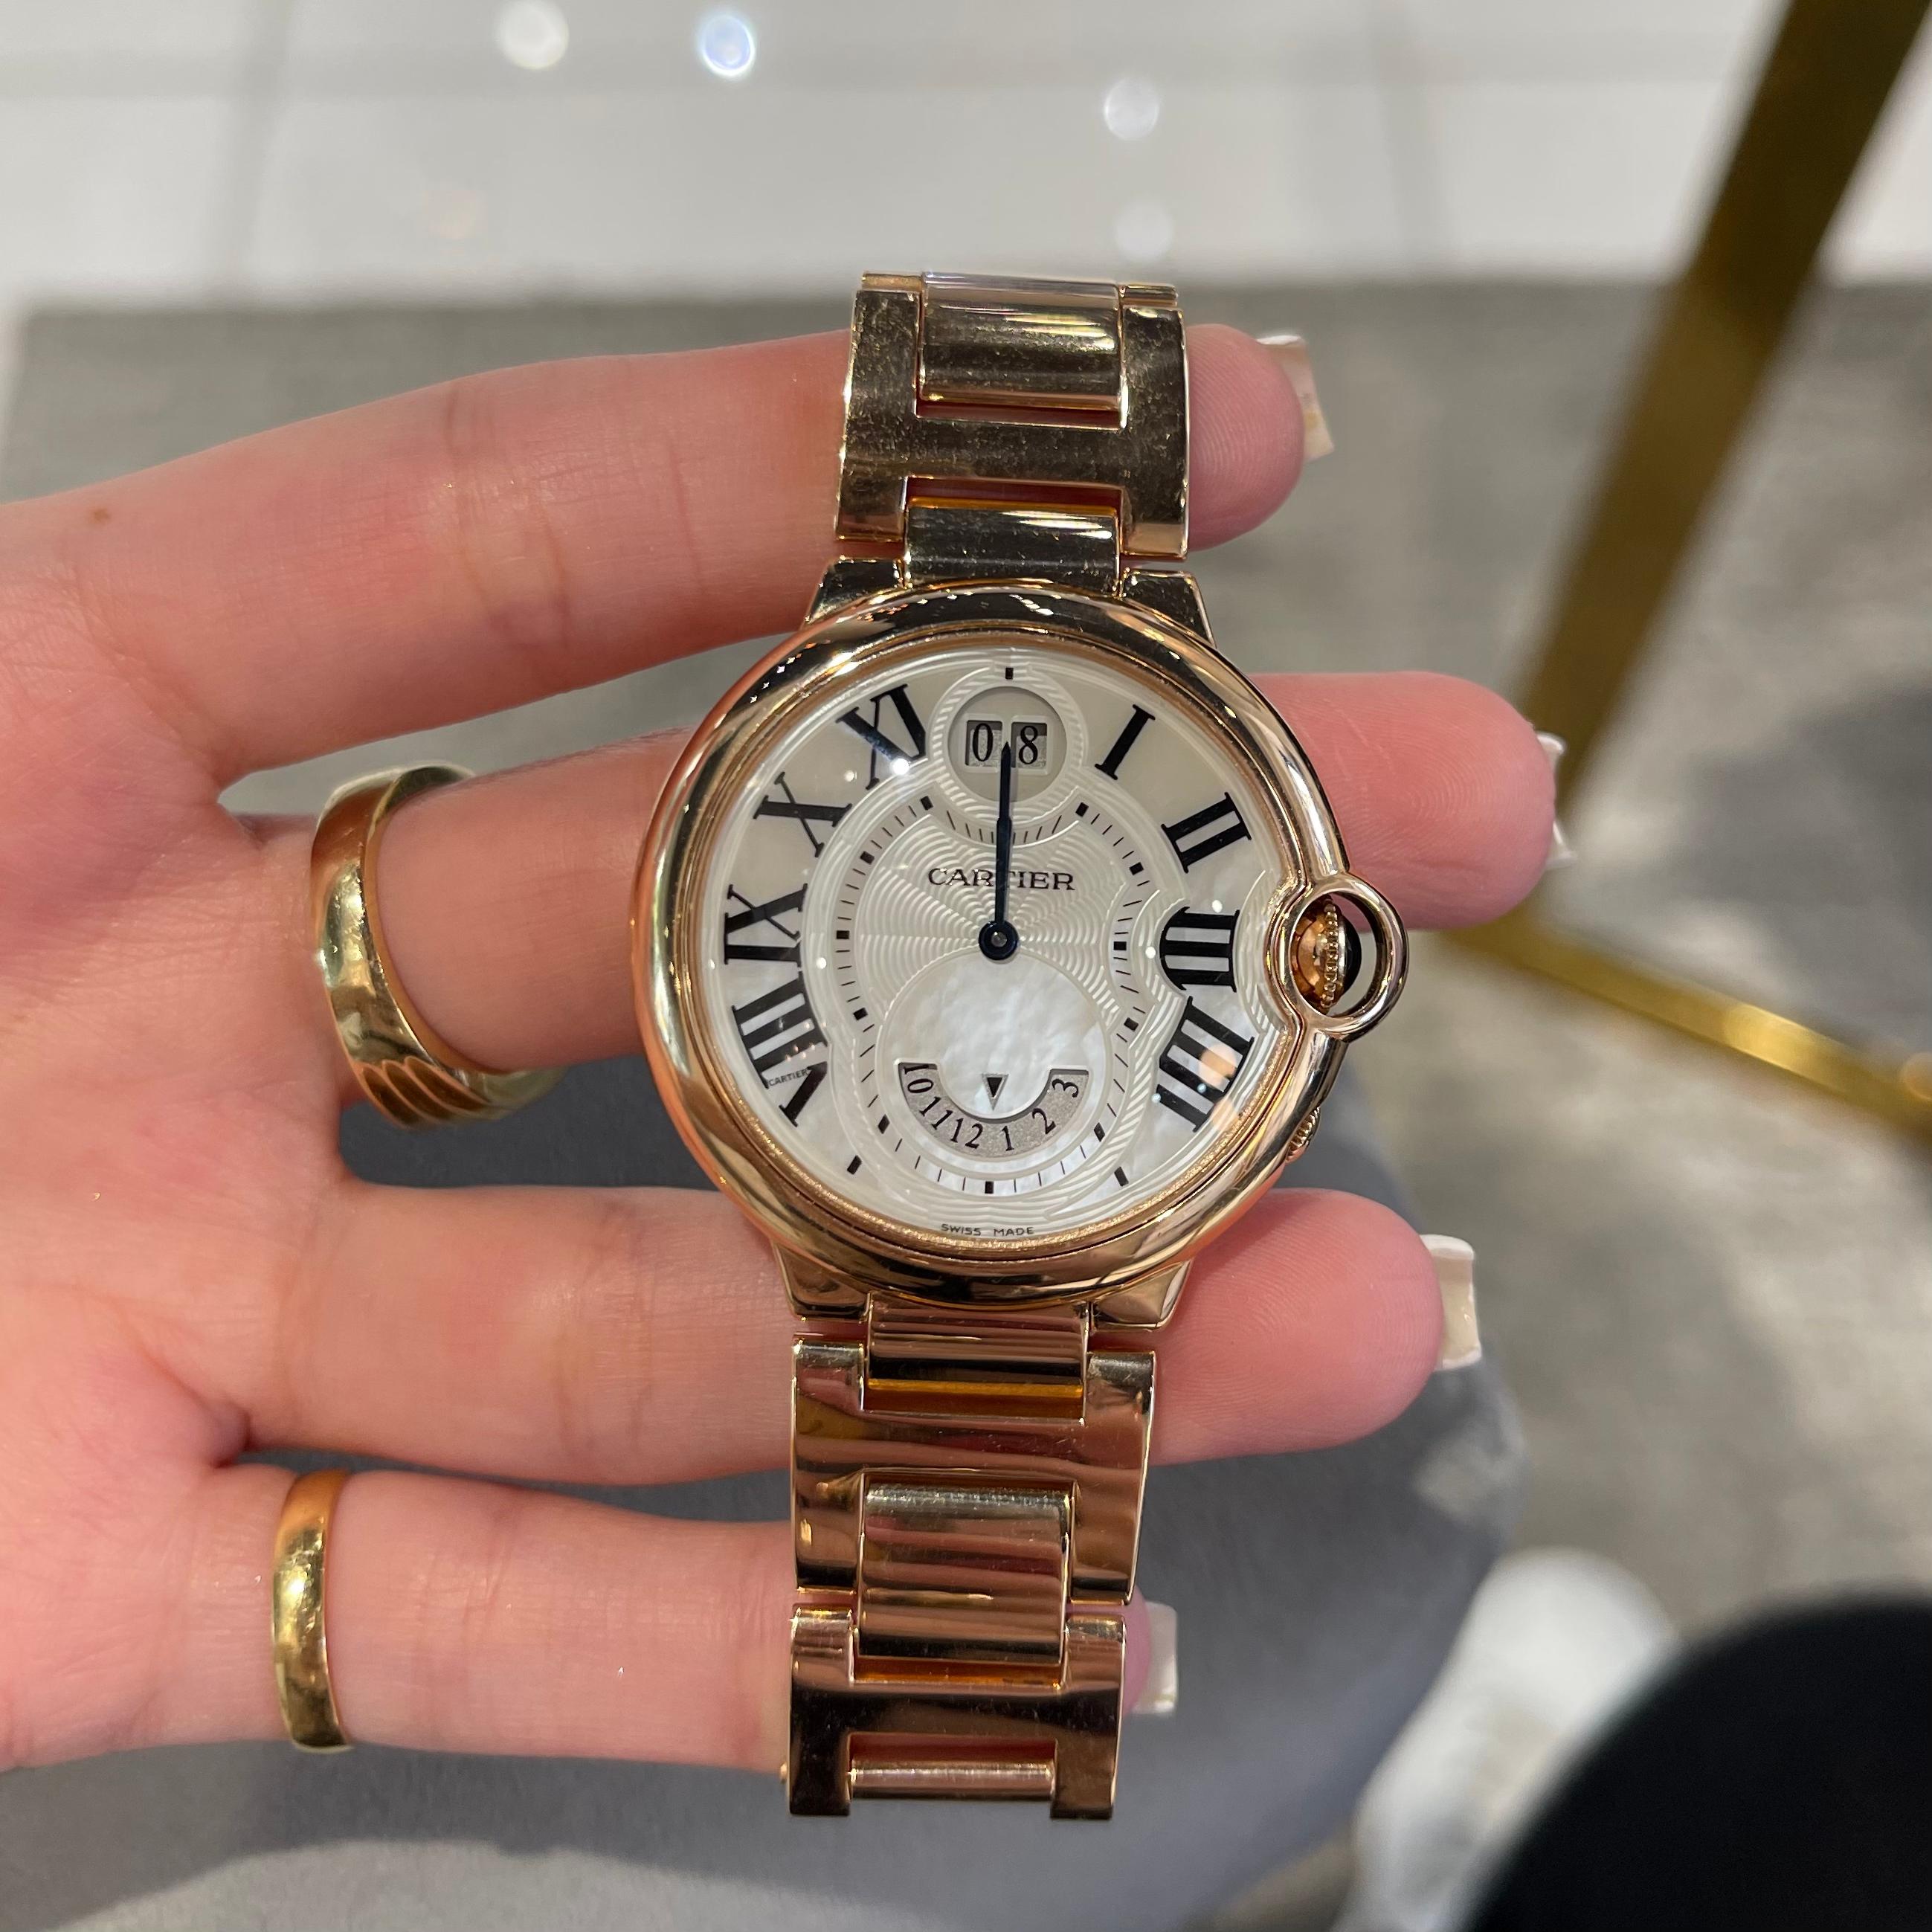 Cartier Ballon Bleu Ref: 3220 Rose Gold Watch, W6920035 In Good Condition For Sale In Miami, FL